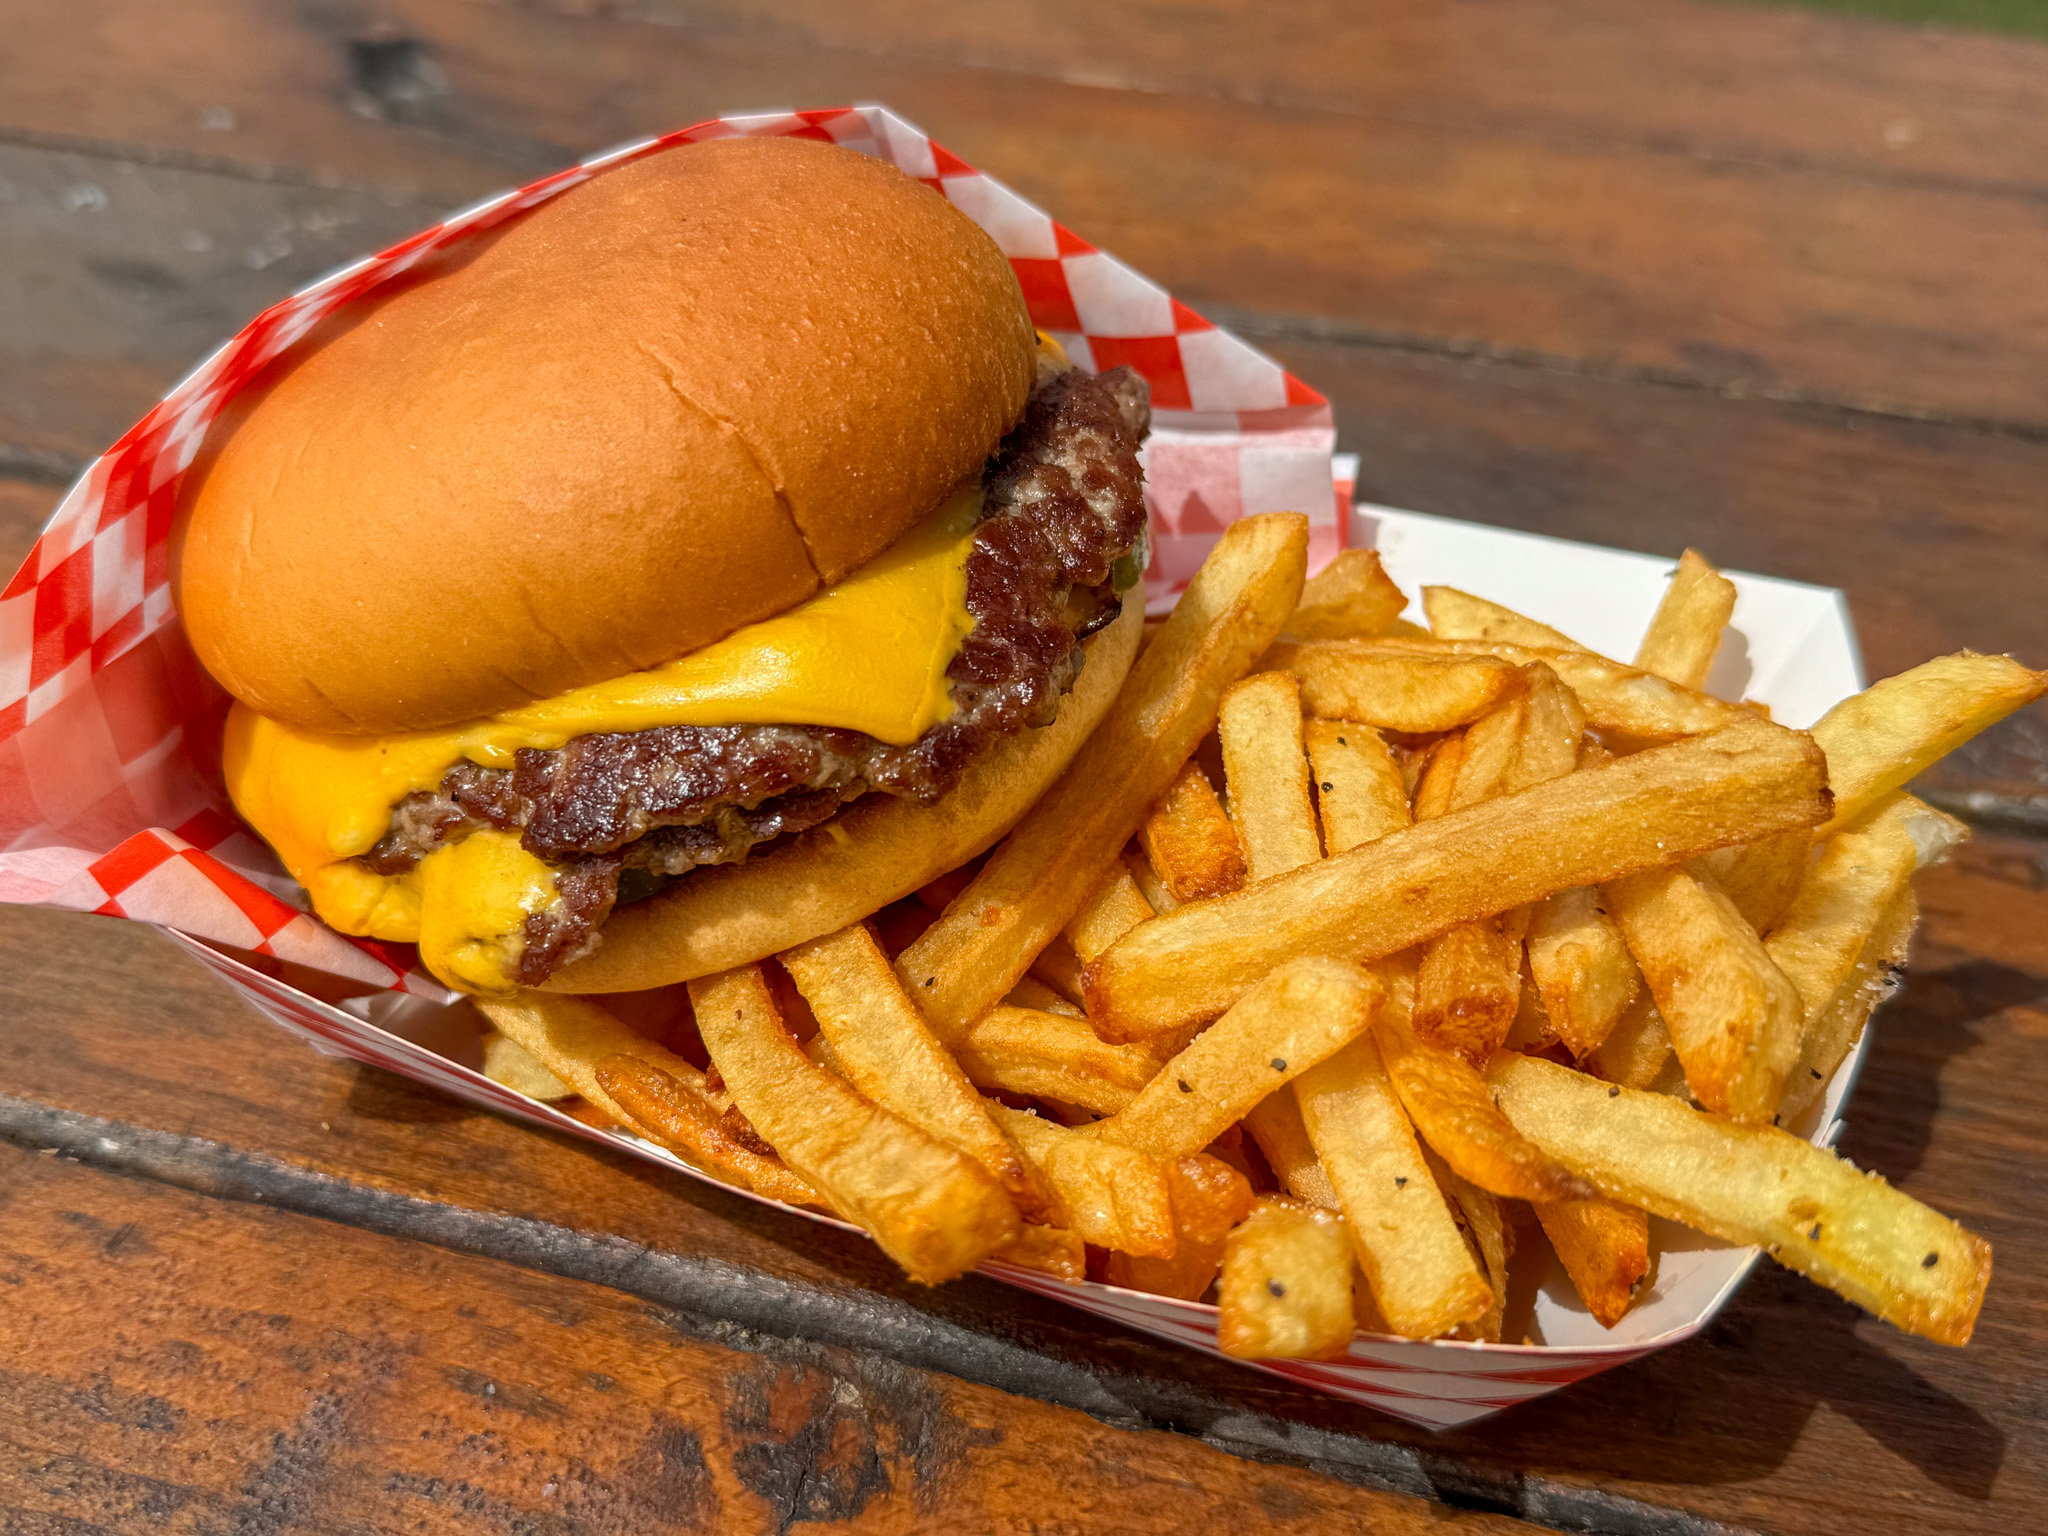 A cheeseburger with fries in a checkered basket, on a wooden surface.